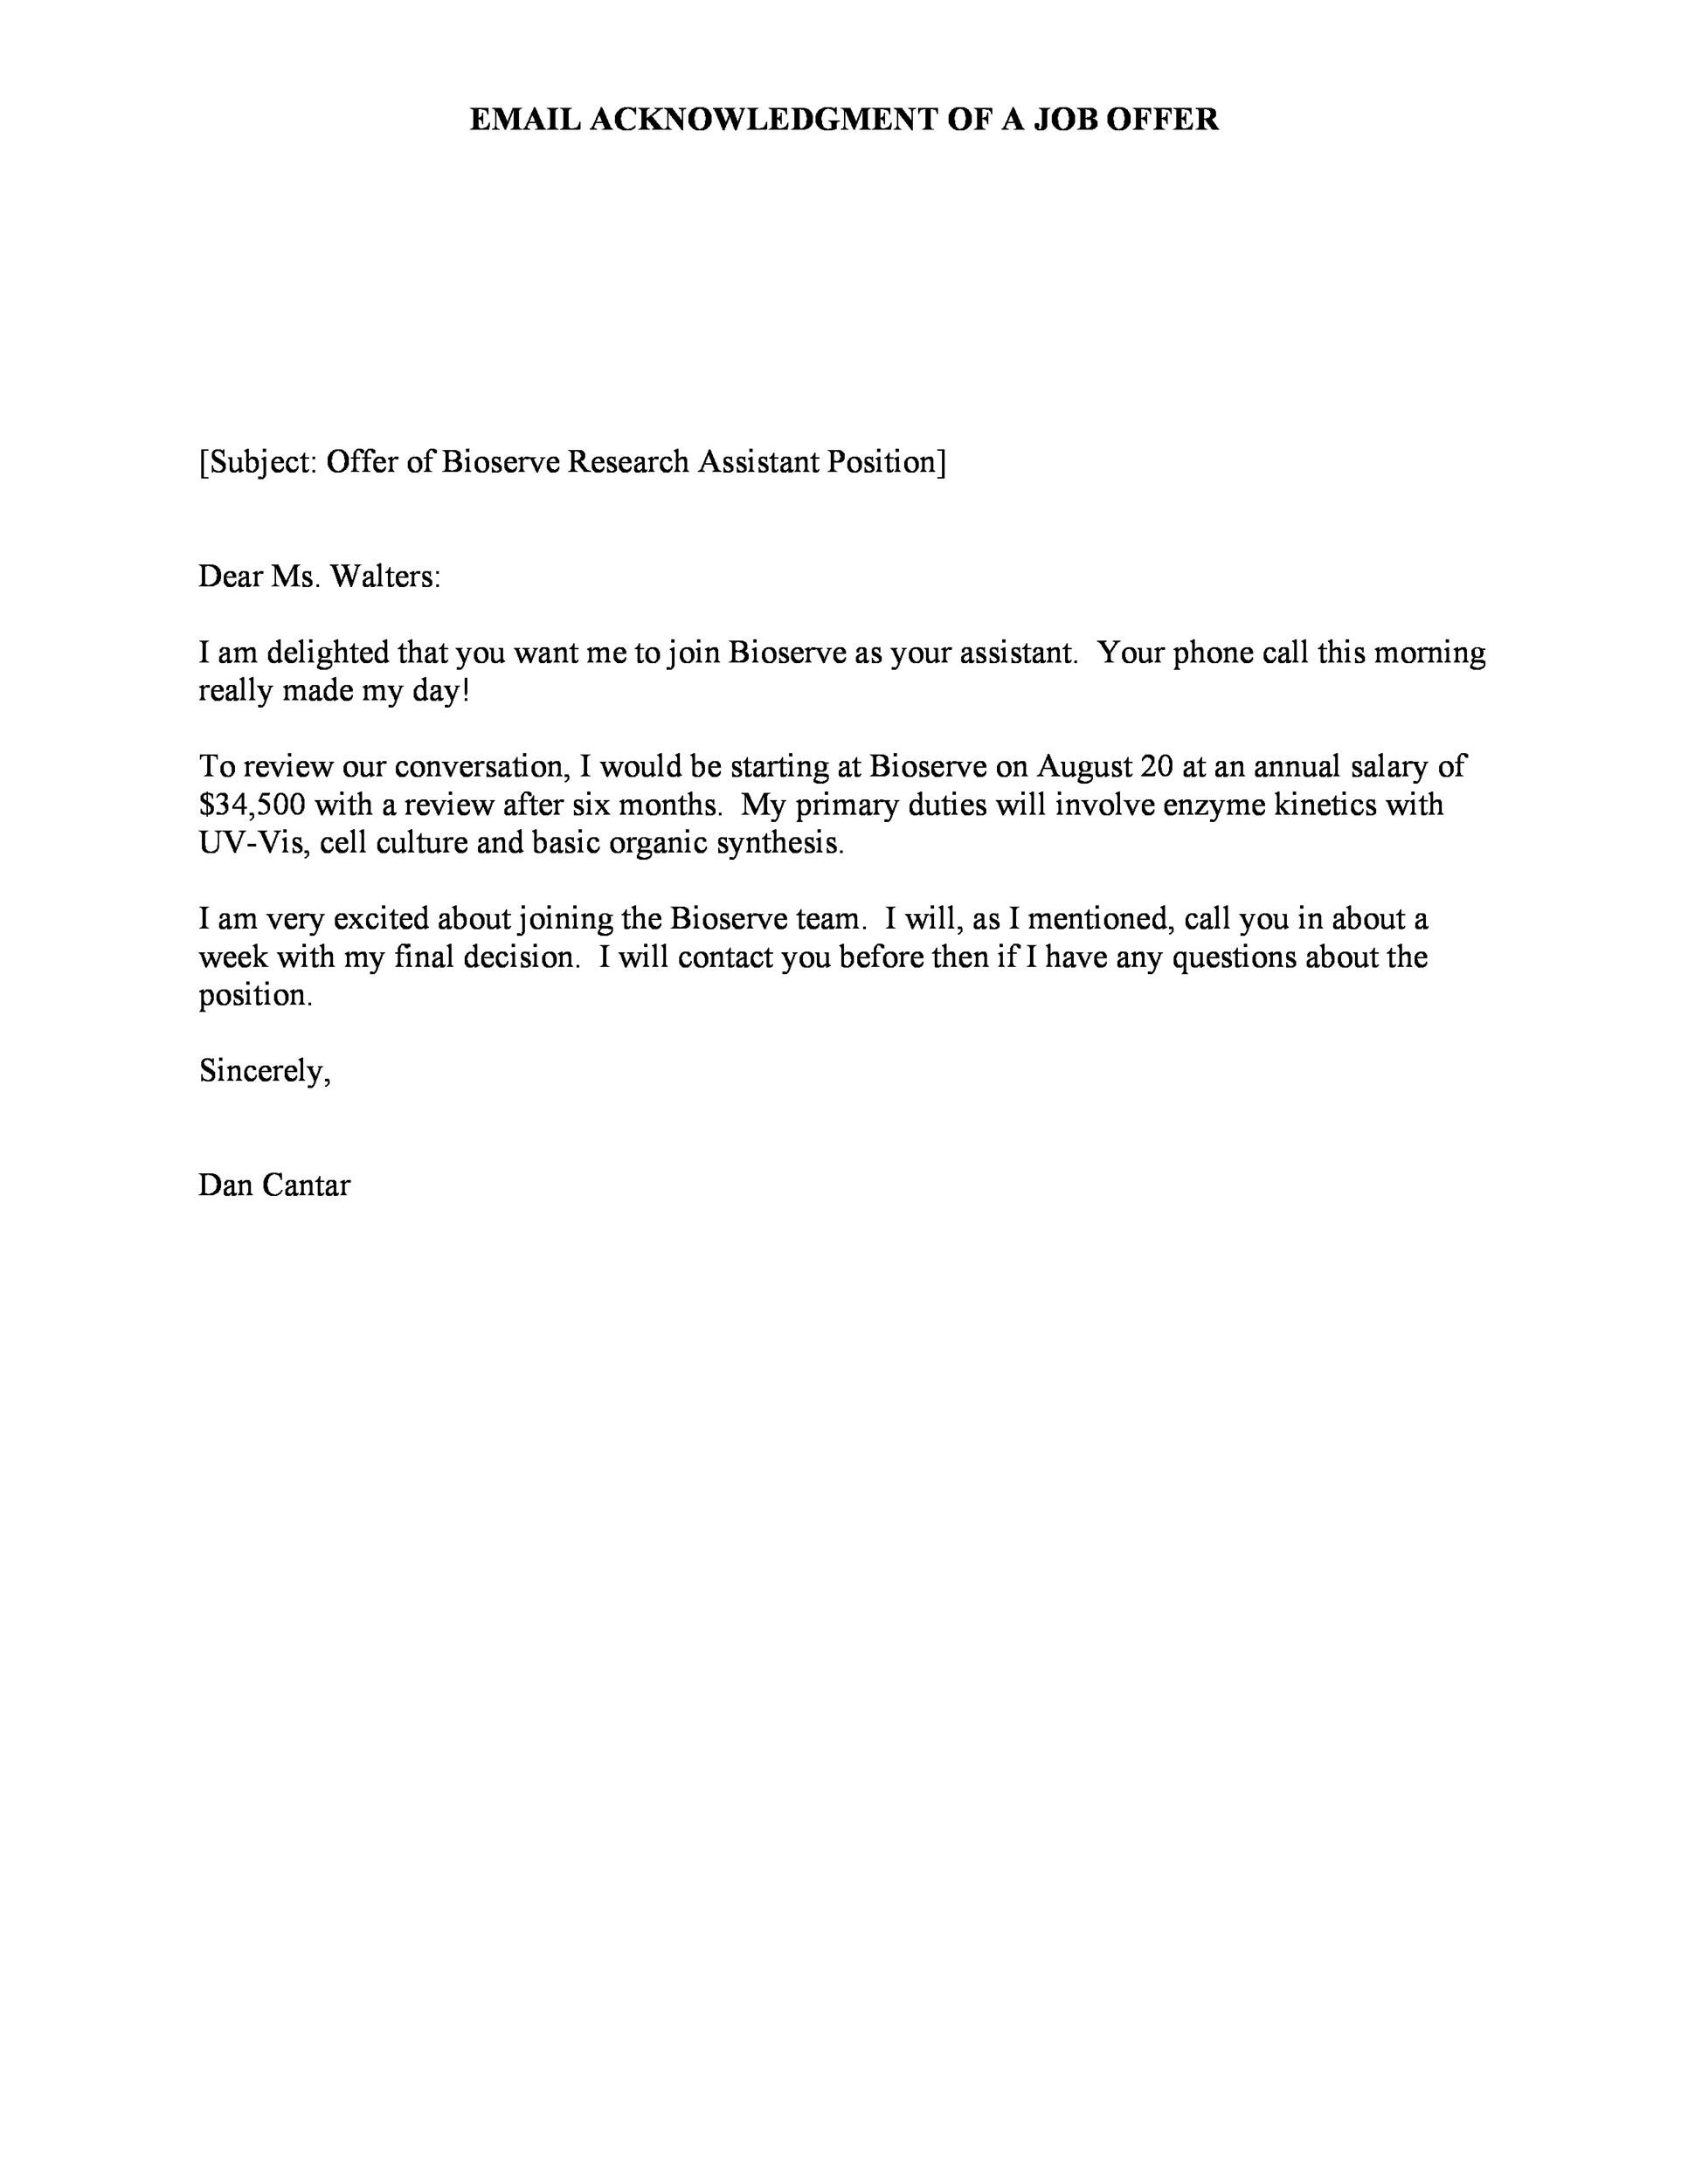 40 Professional Job Offer Acceptance Letter Email Templates